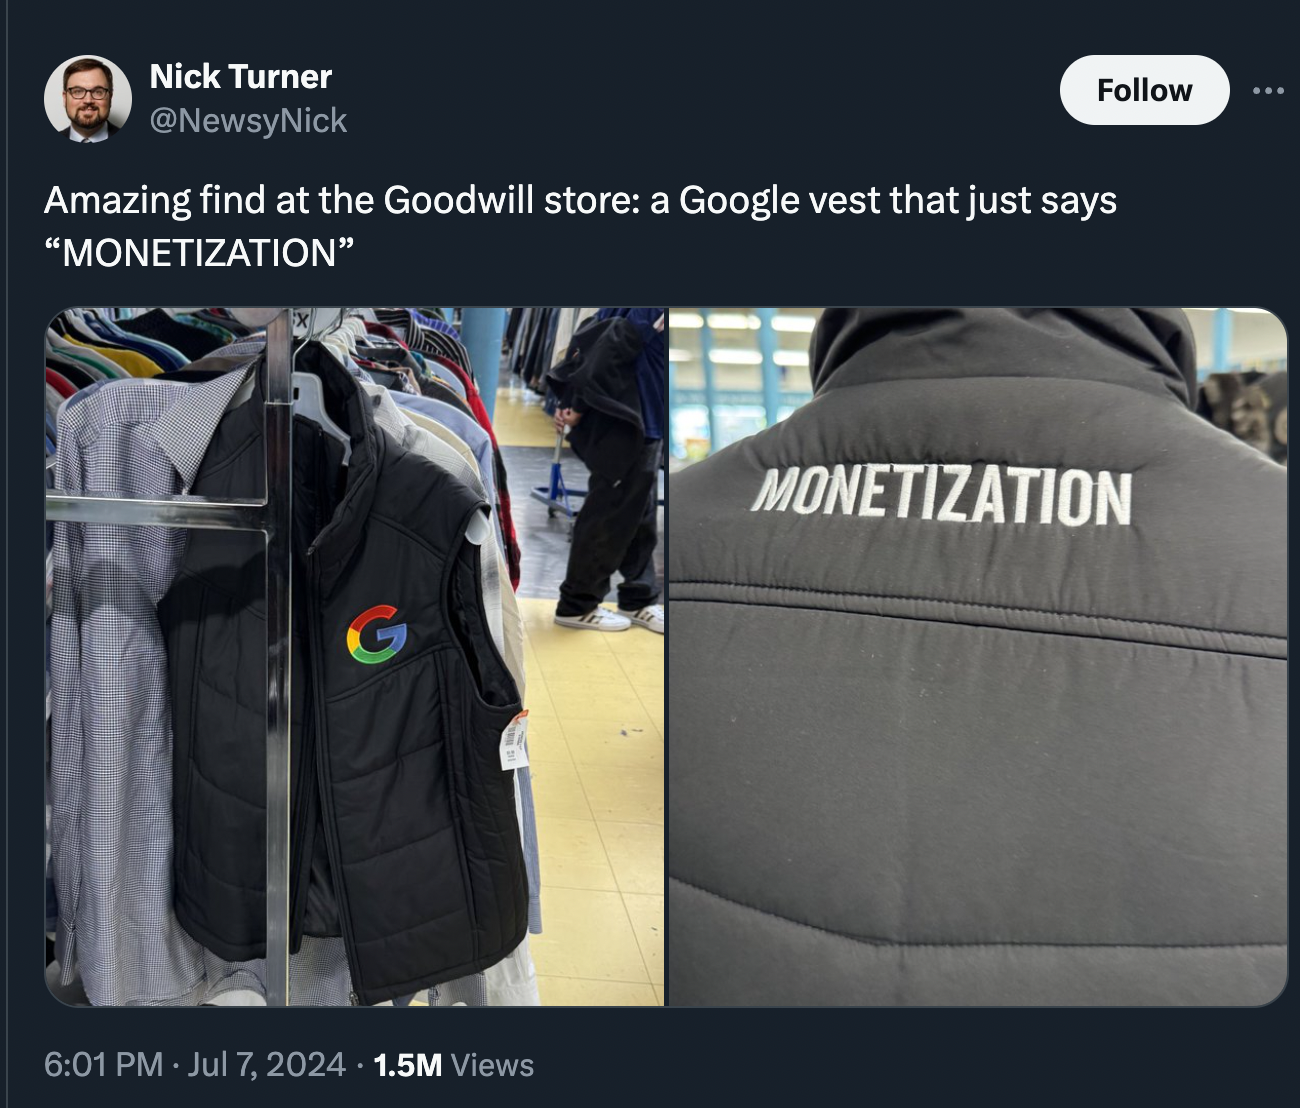 pocket - Nick Turner Amazing find at the Goodwill store a Google vest that just says "Monetization" 1.5M Views Monetization